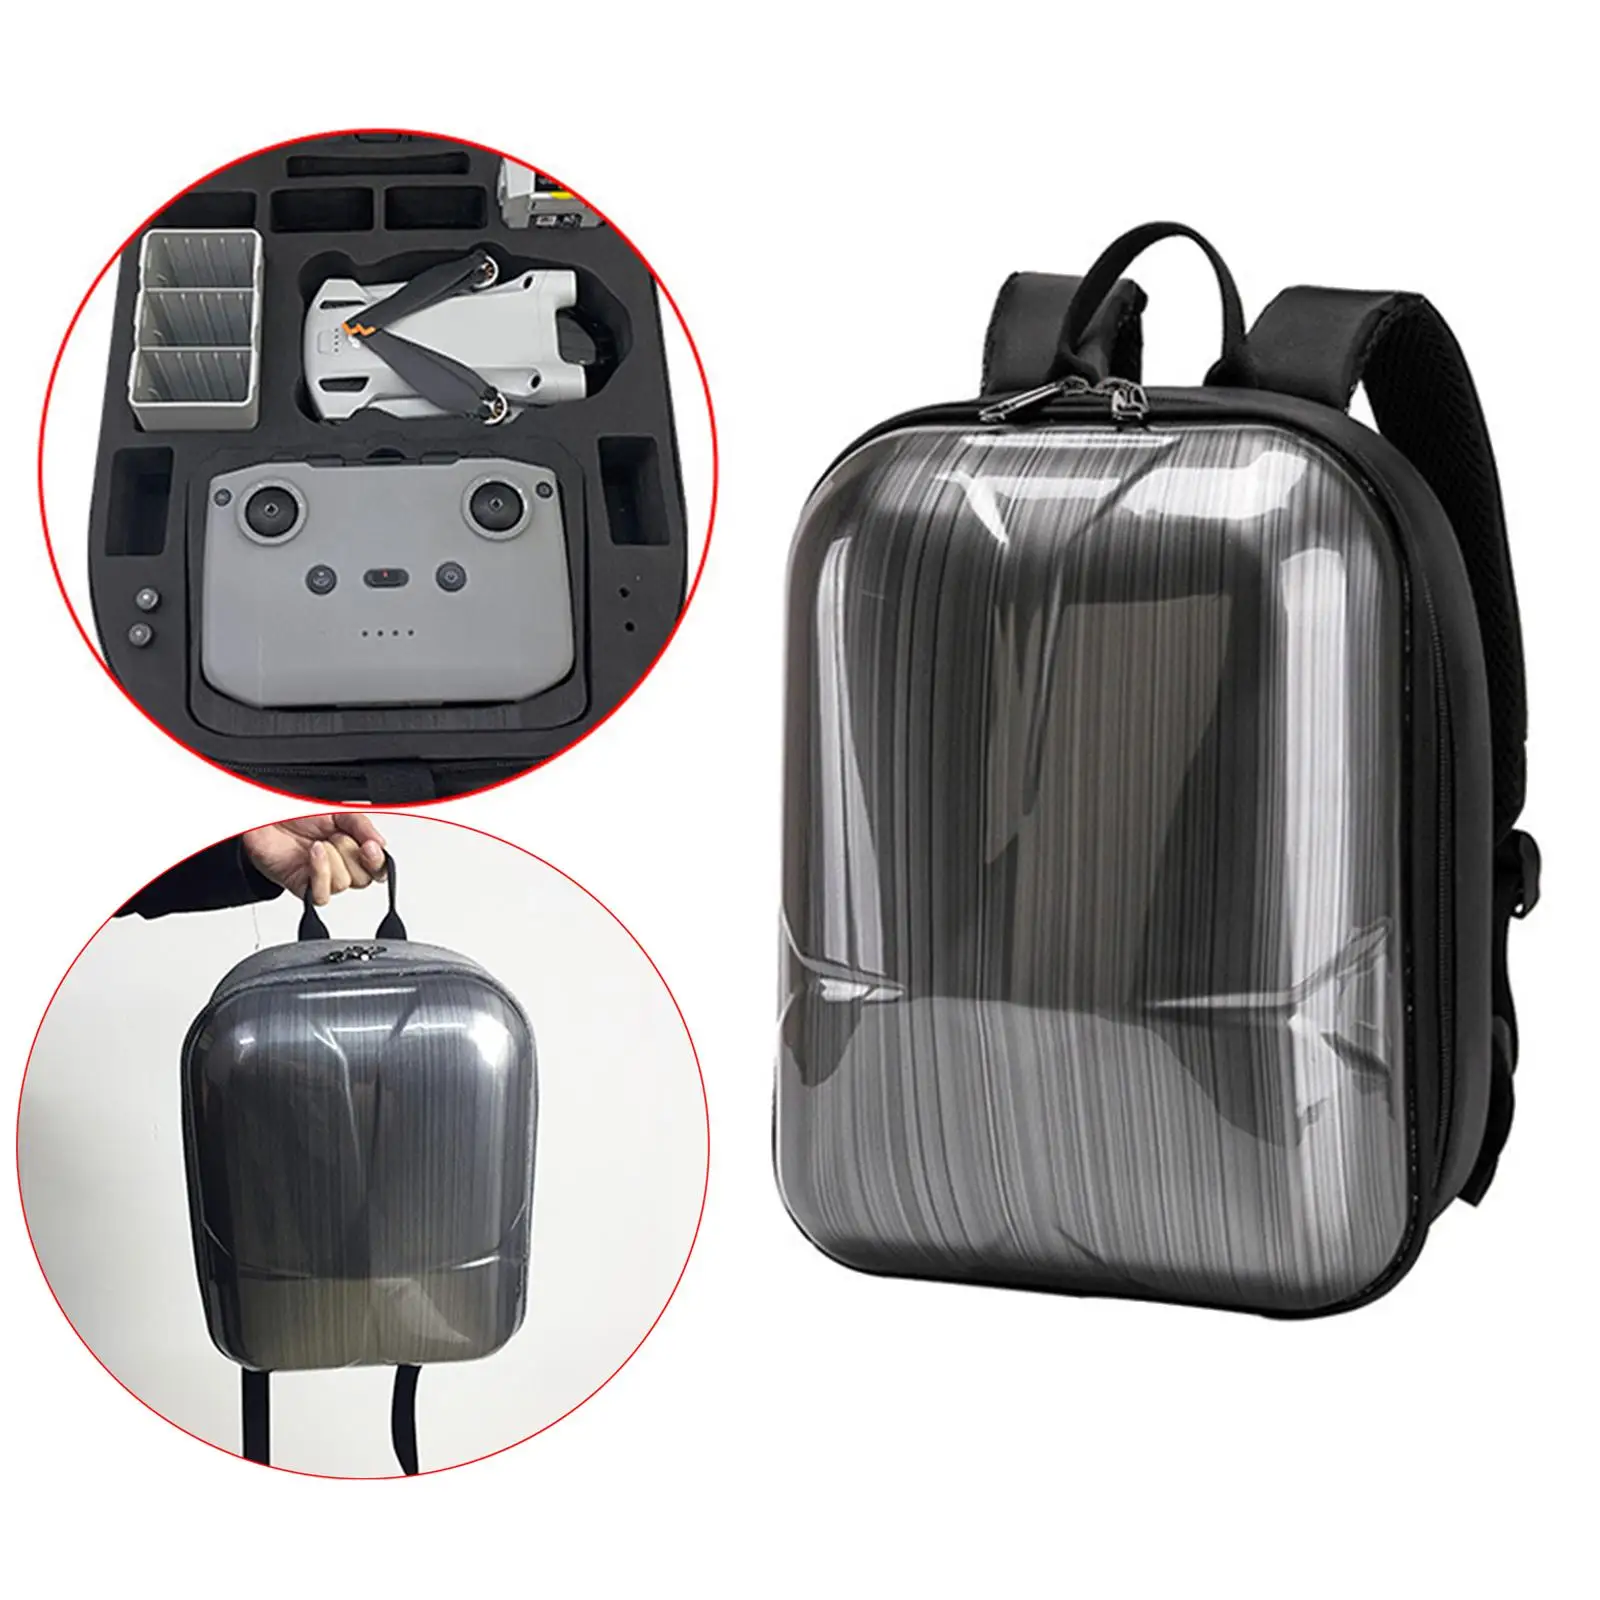 Portable Travel Carry Case Backpack Storage Bag Shockproof Waterproof EVA for DJI Mini 3 Pro Drone Quadcopter and Accessories